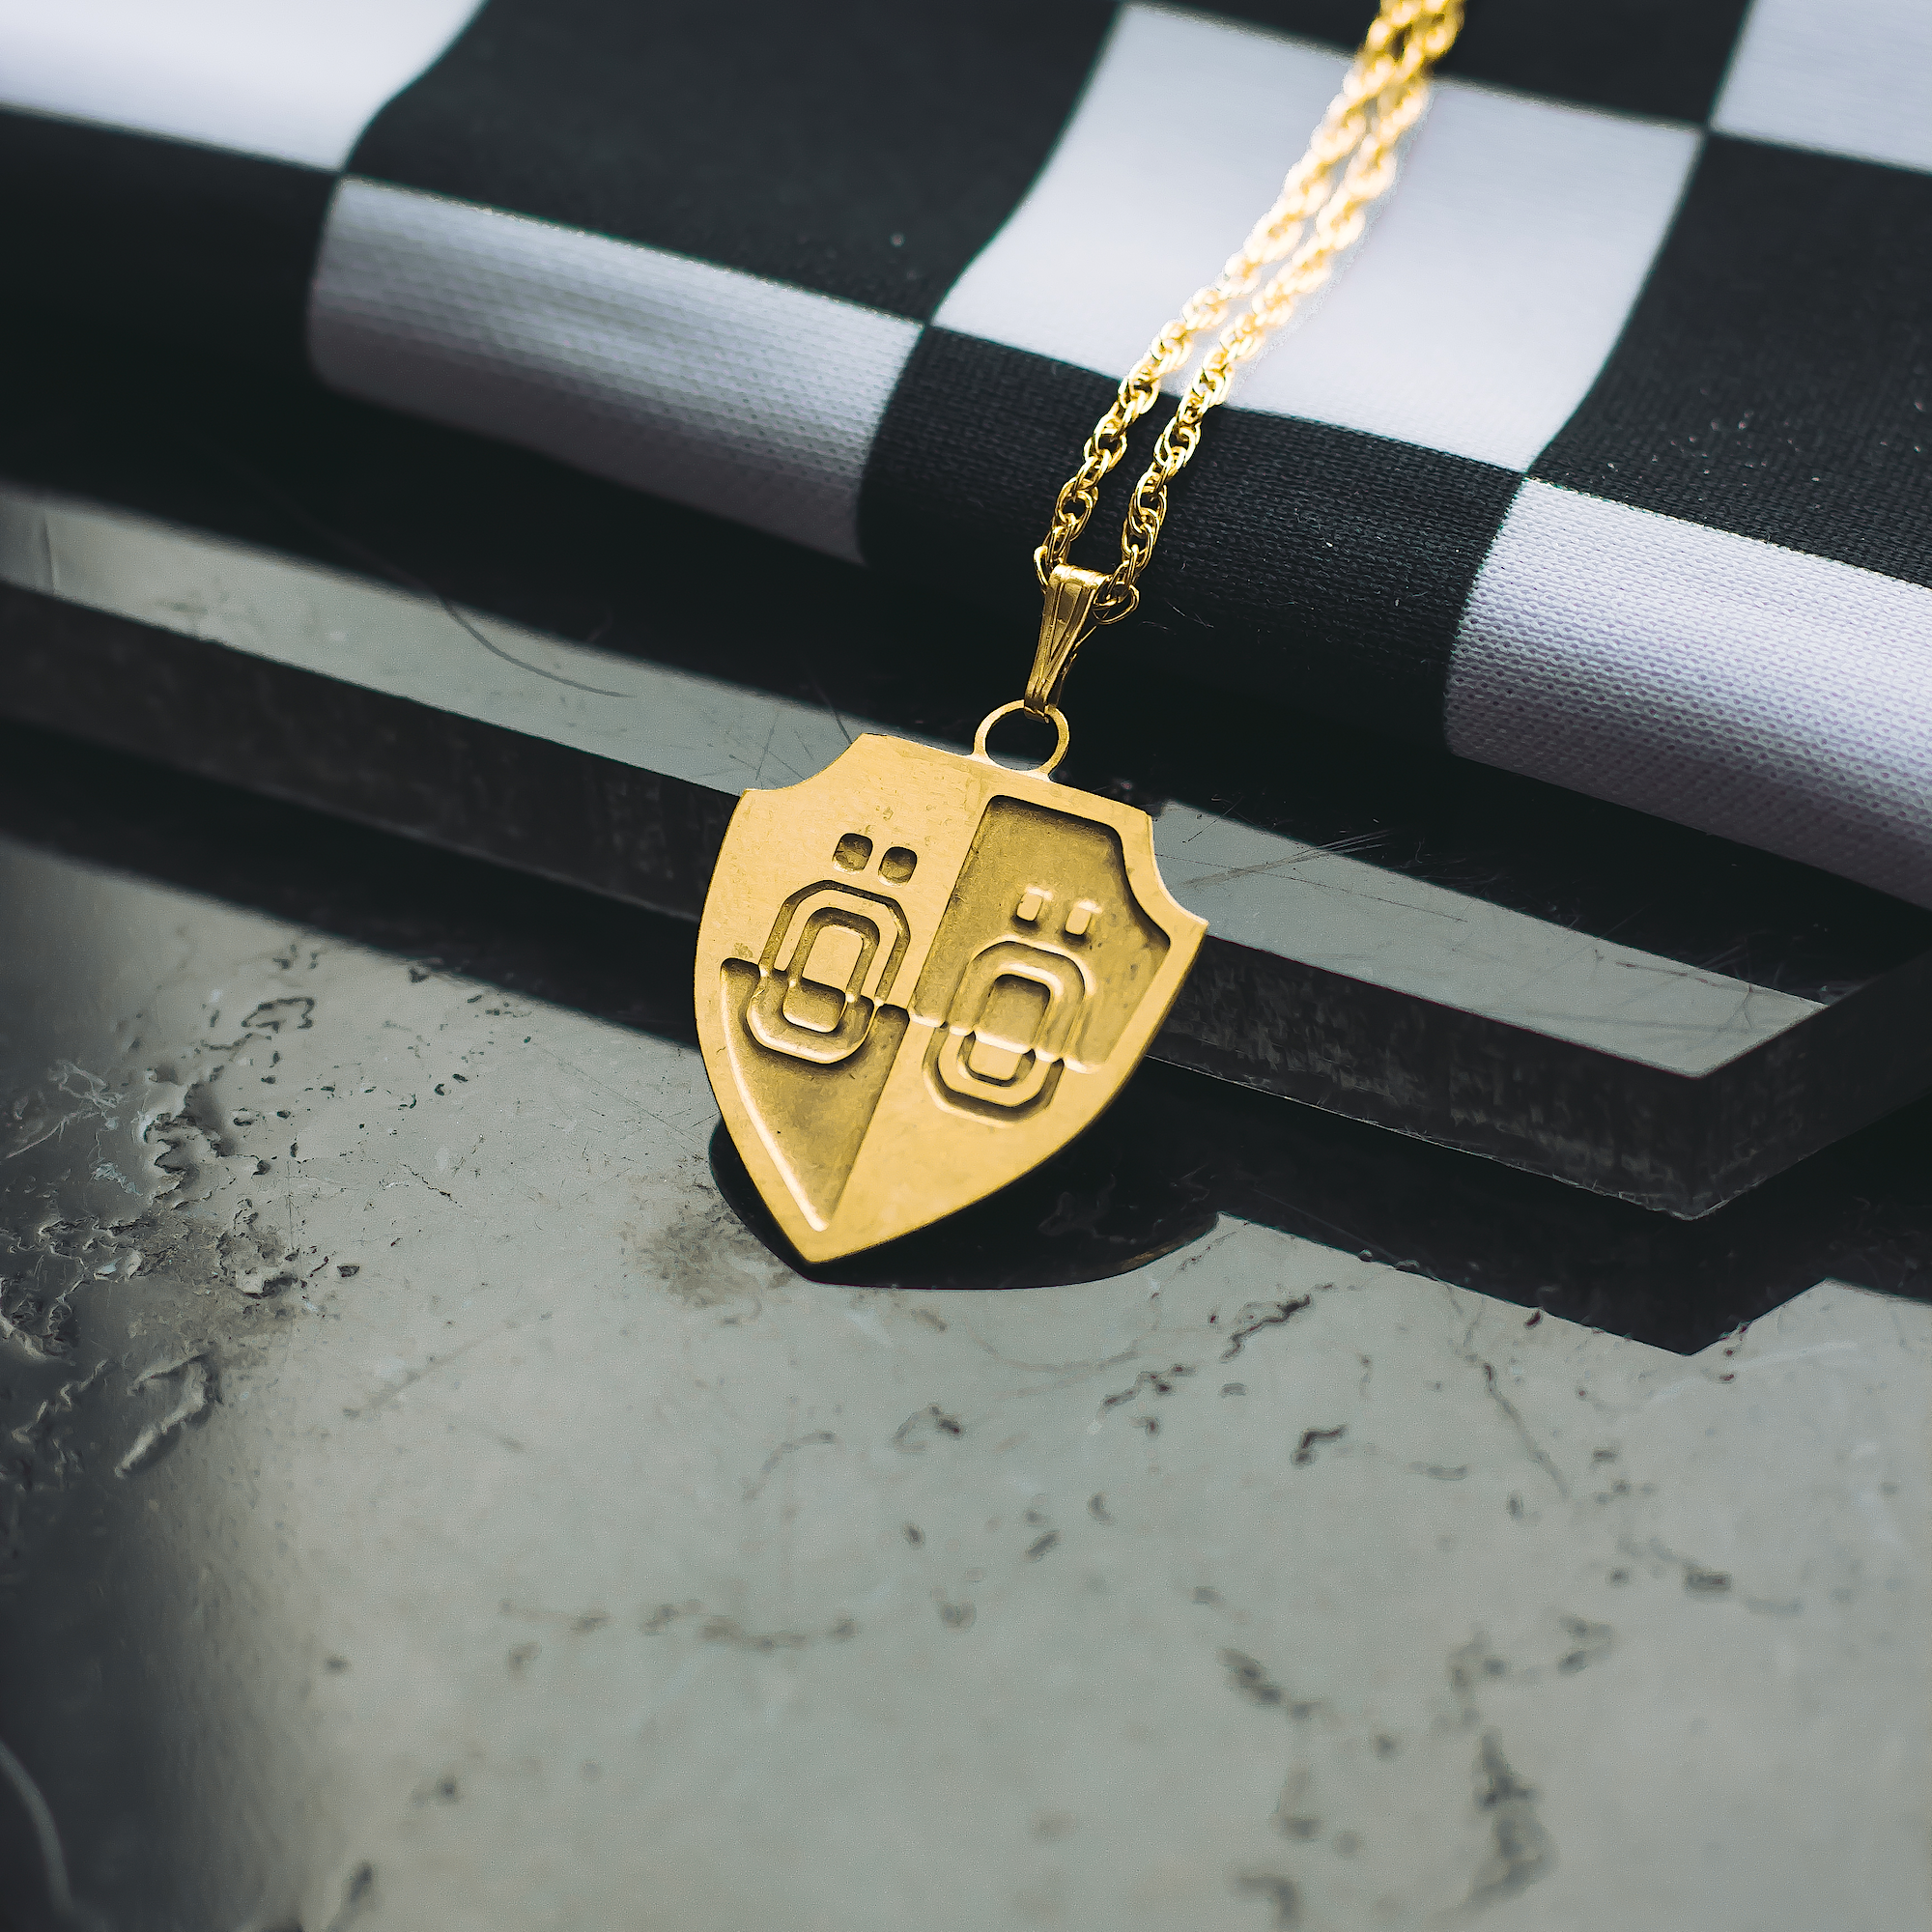 Inner Champion Necklace - Gold